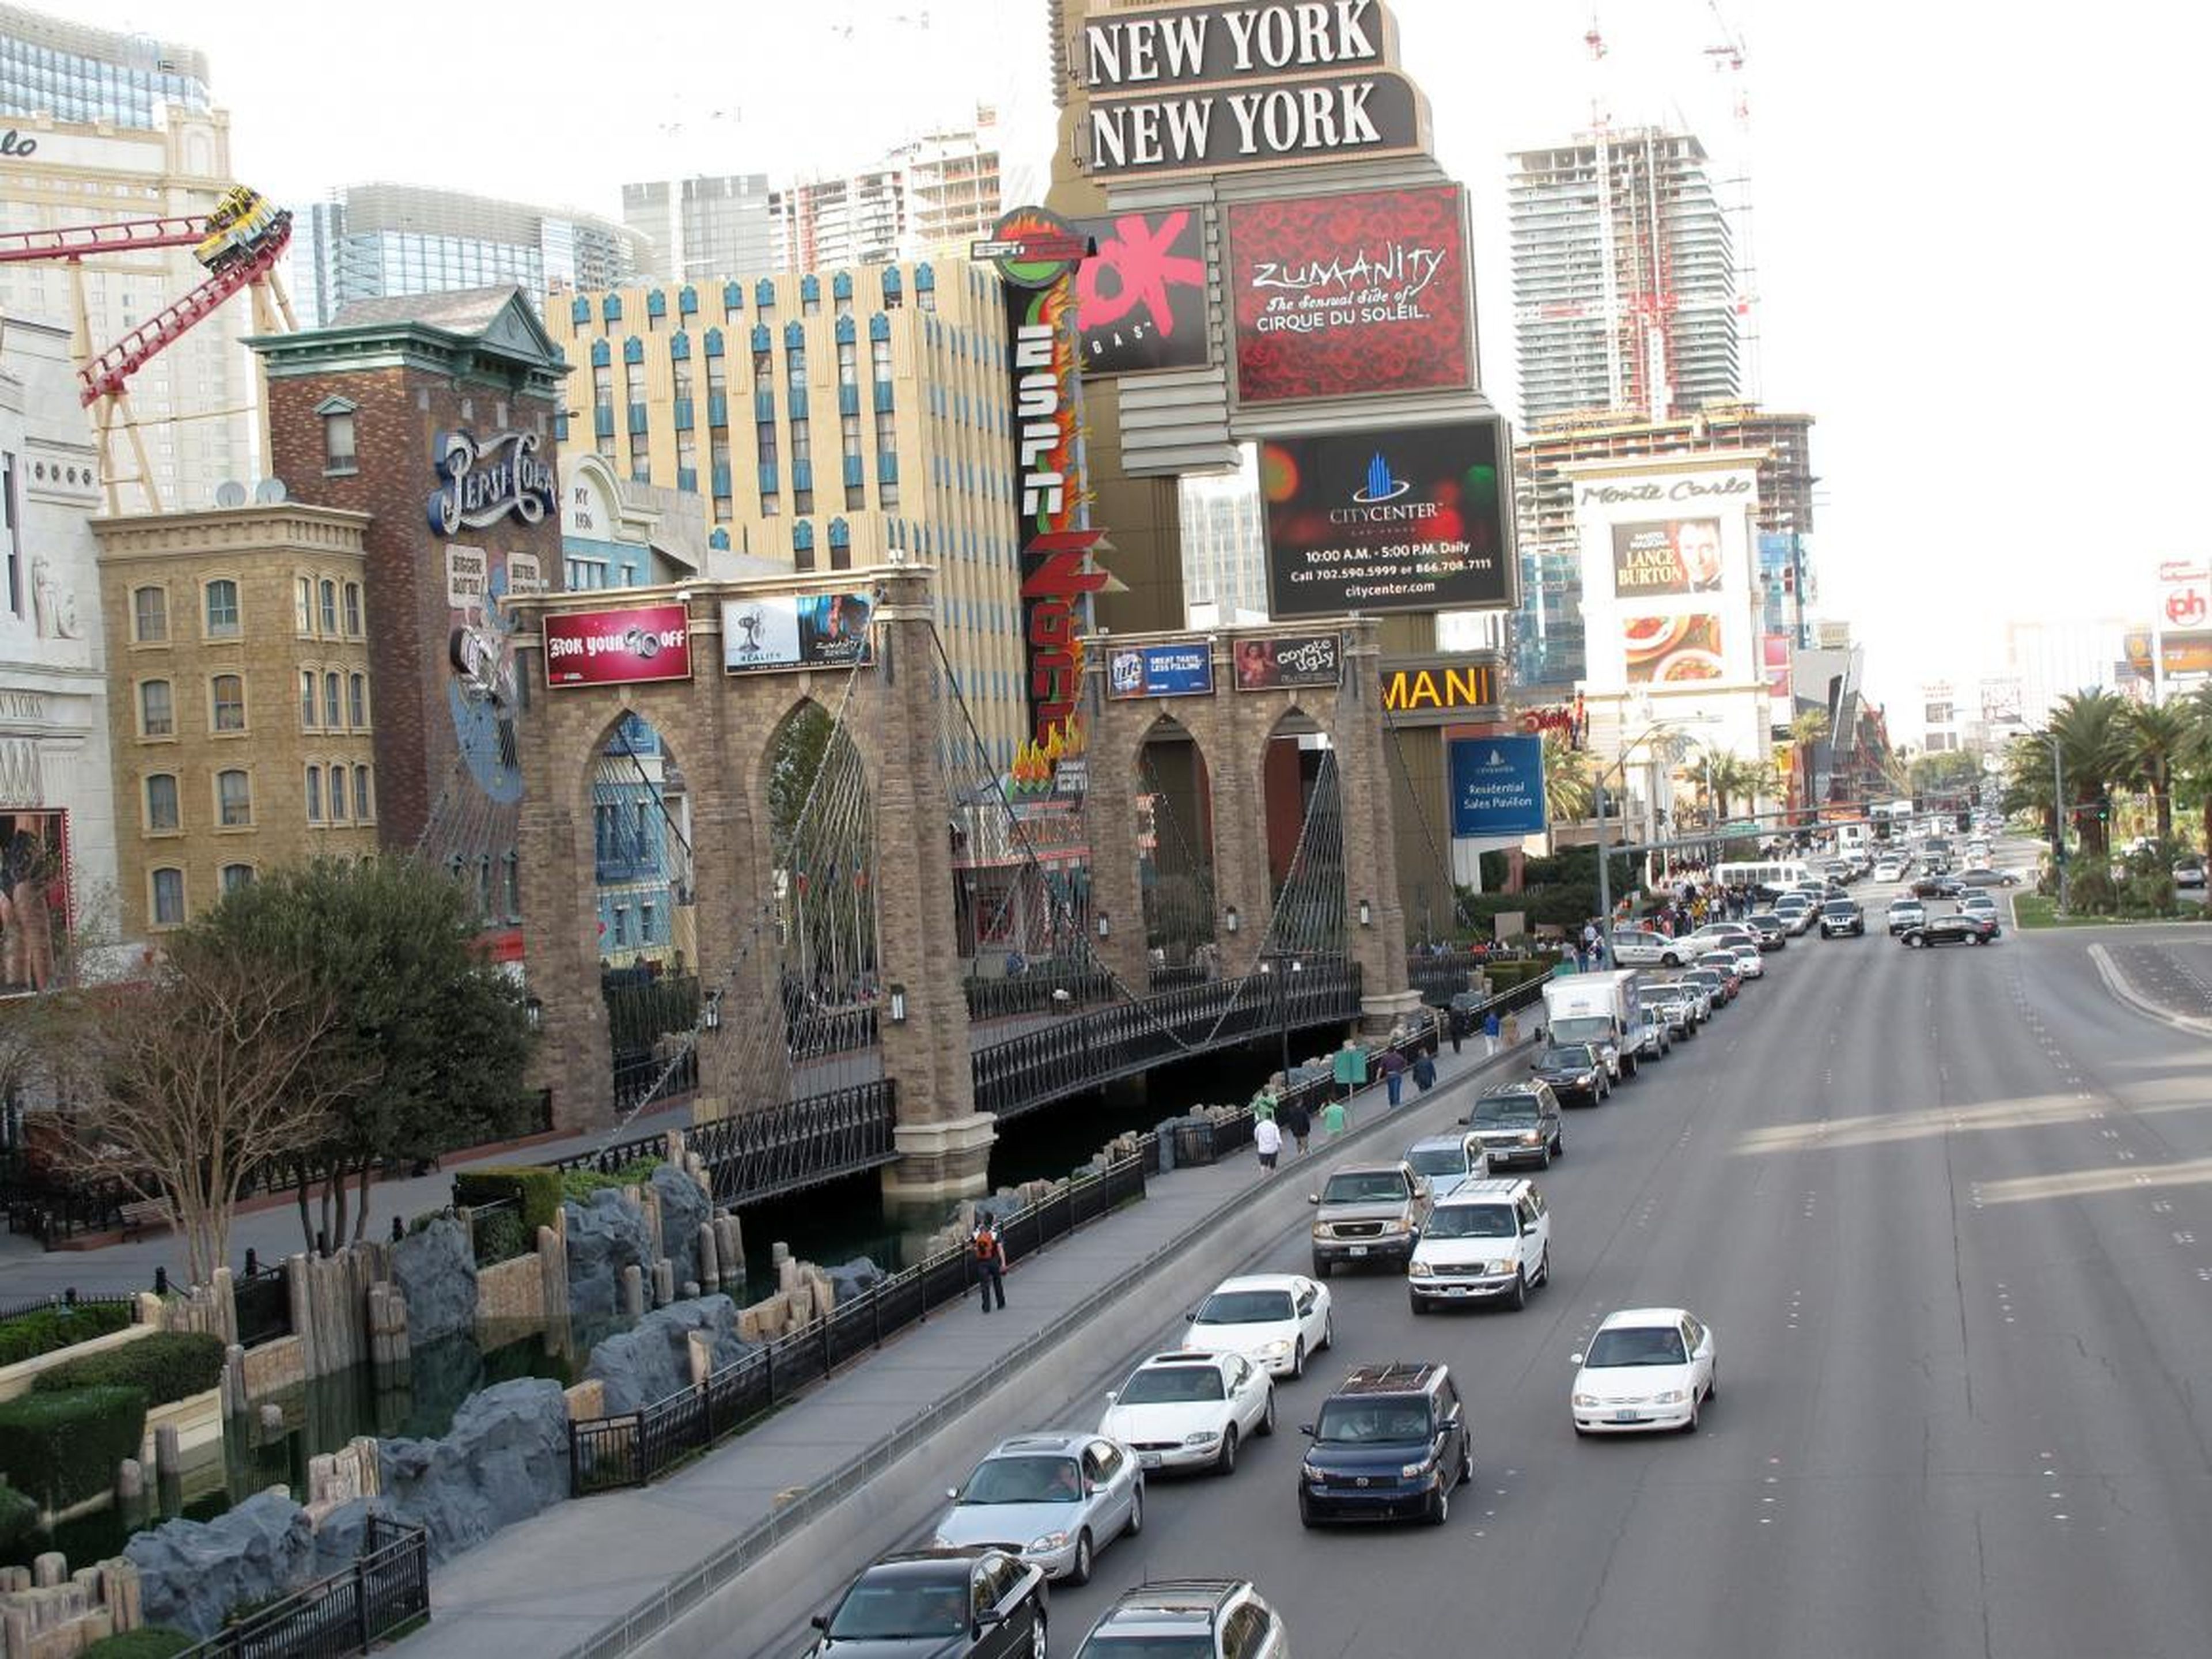 According to some tourists, Las Vegas Boulevard (otherwise known as "The Strip") is not as walkable as it’s made out to be ...